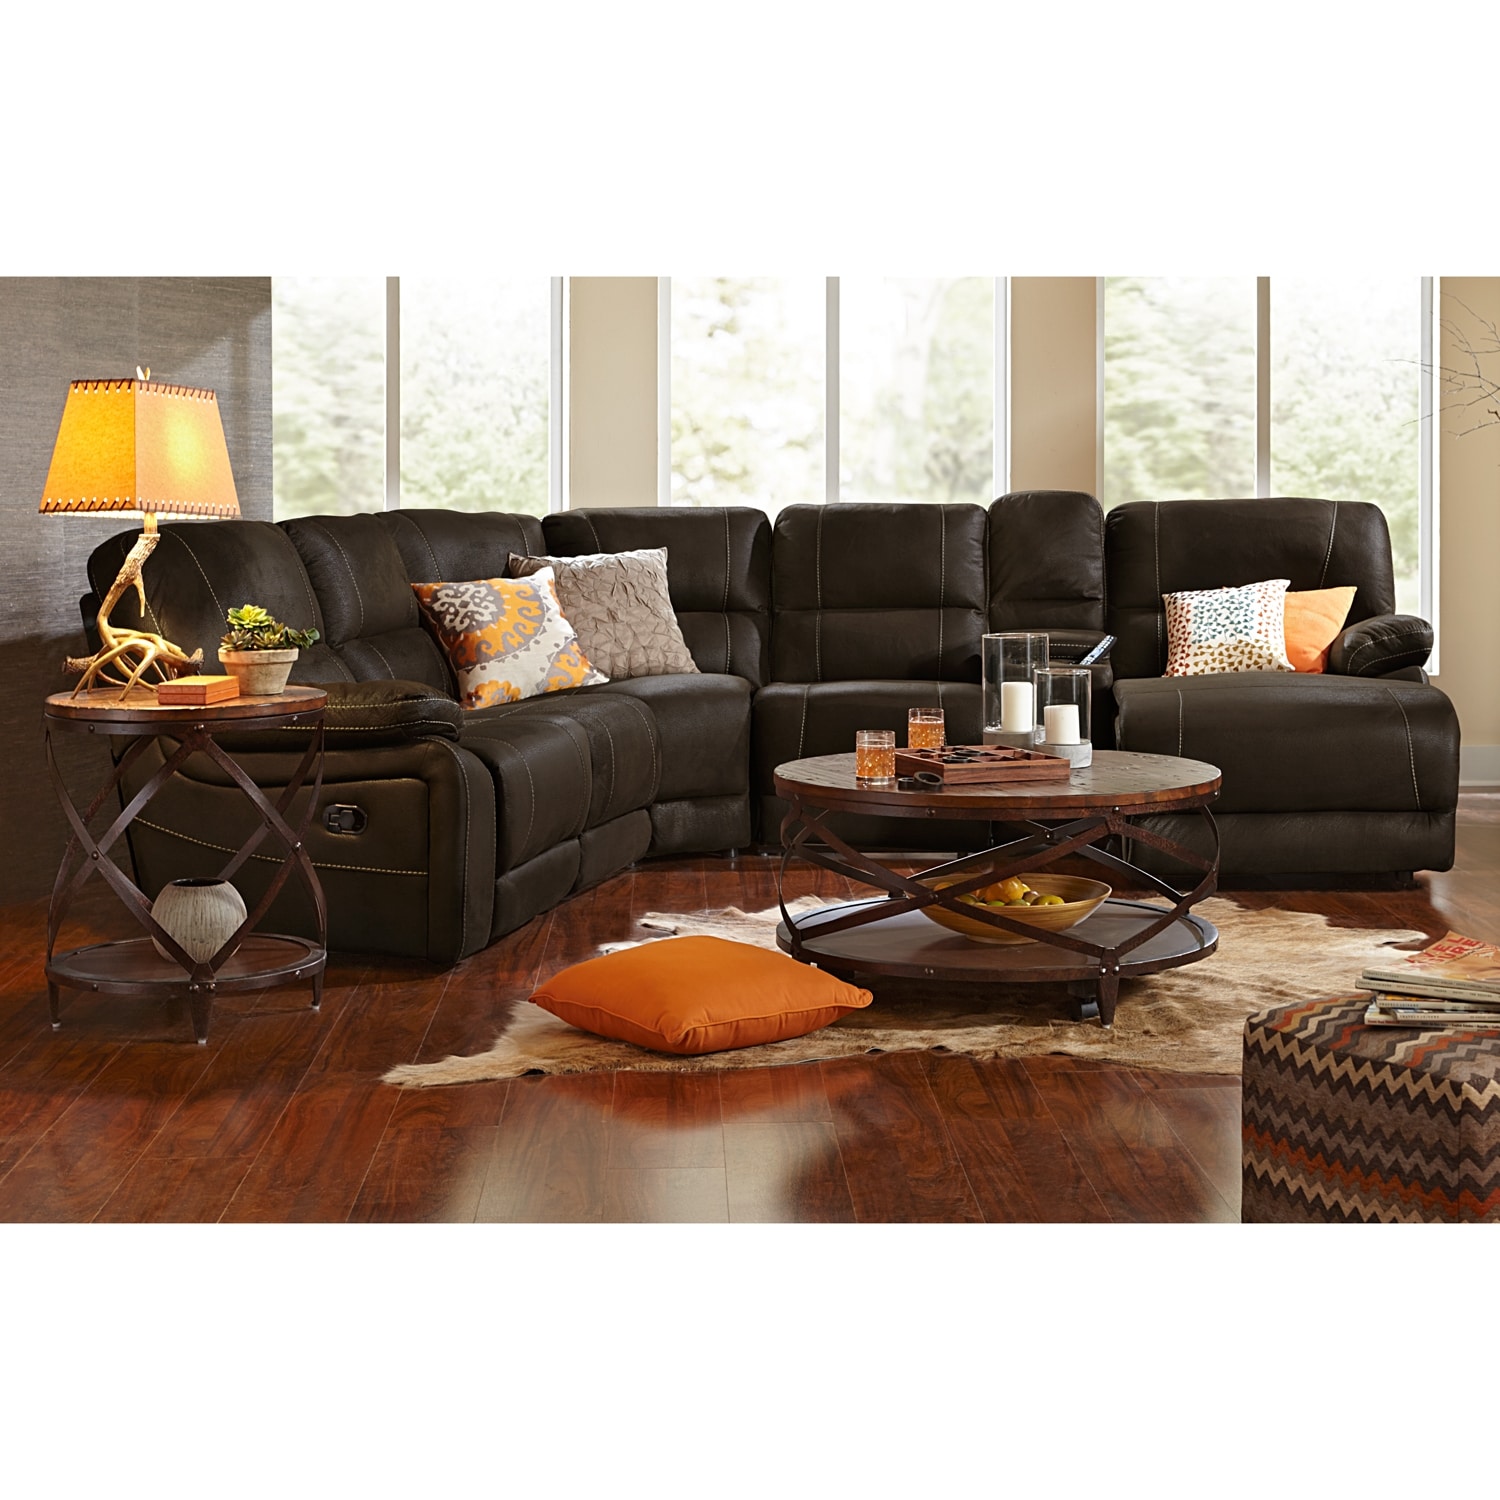 Wyoming 5-Piece Reclining Sectional with Right-Facing Chaise - Saddle Brown | Value City Furniture